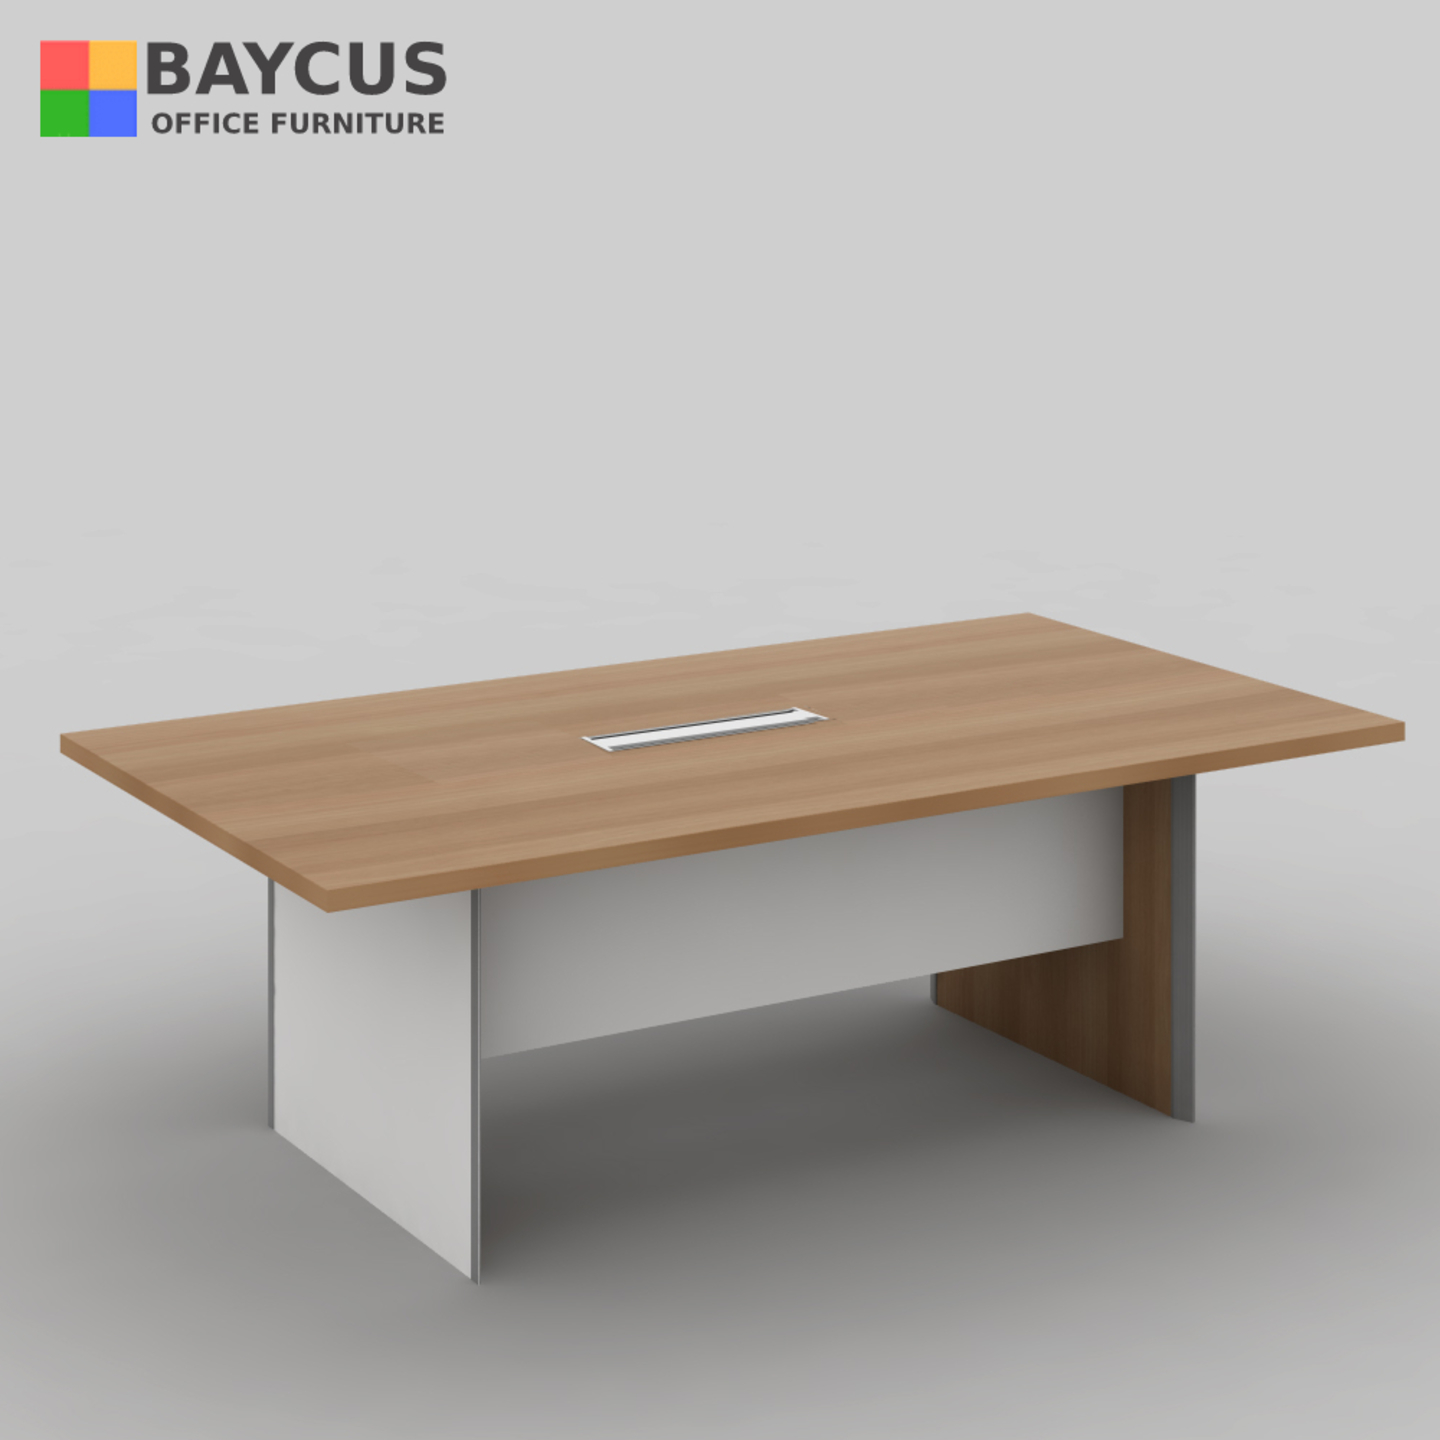 2.4m Rectangular Conference Table Col. Teak with White